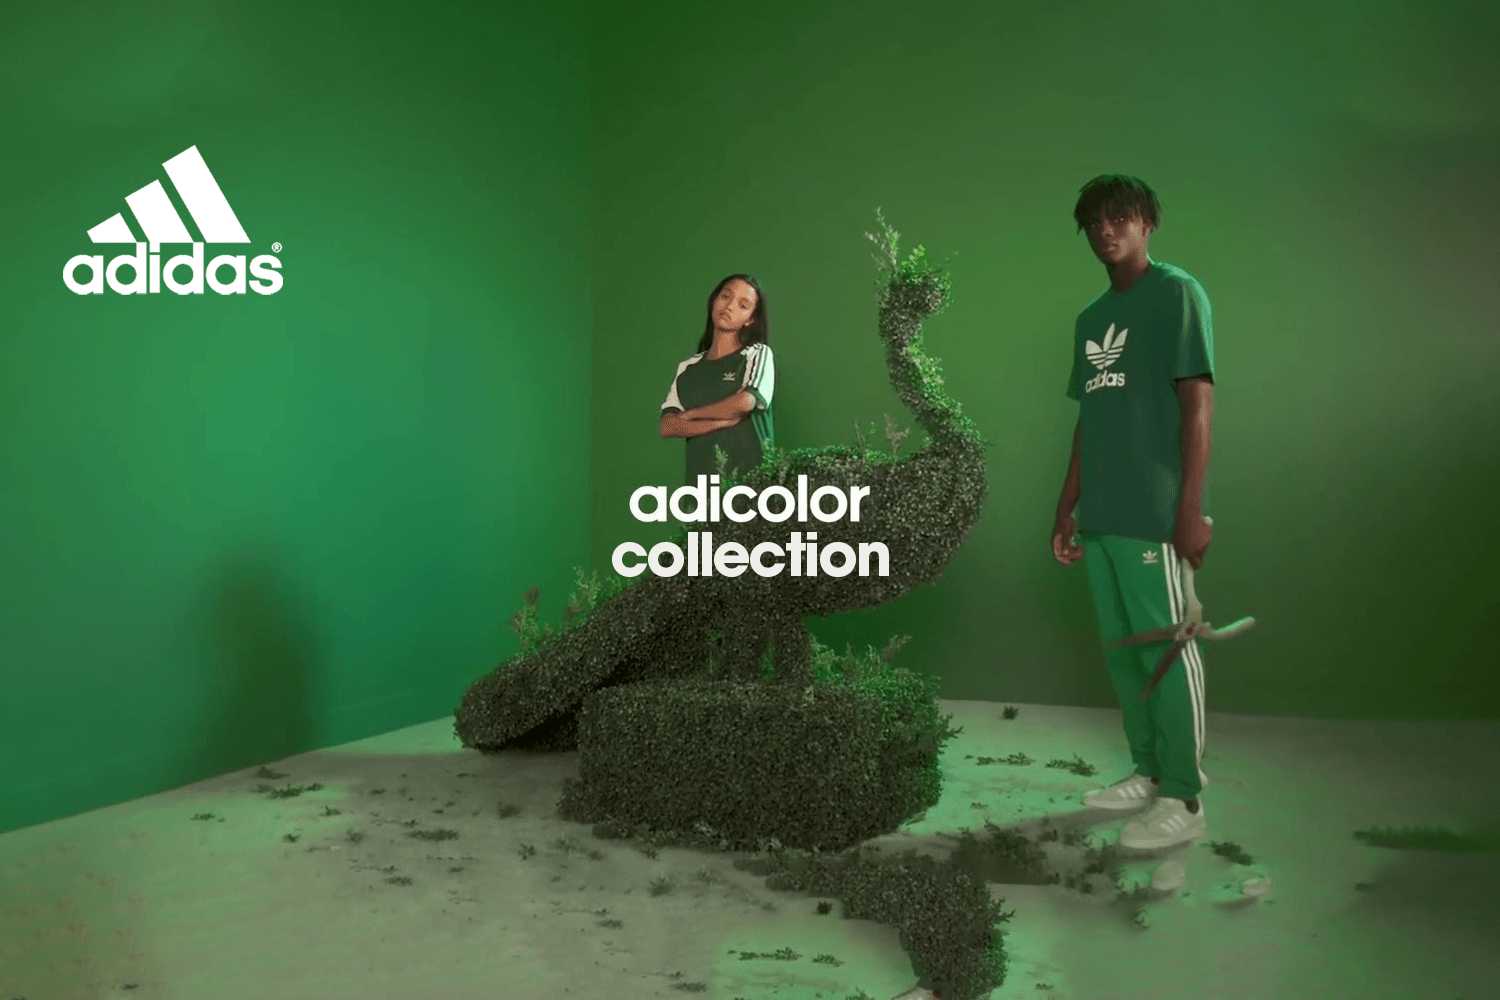 Novelties of the adidas 'ADICOLOR' collection